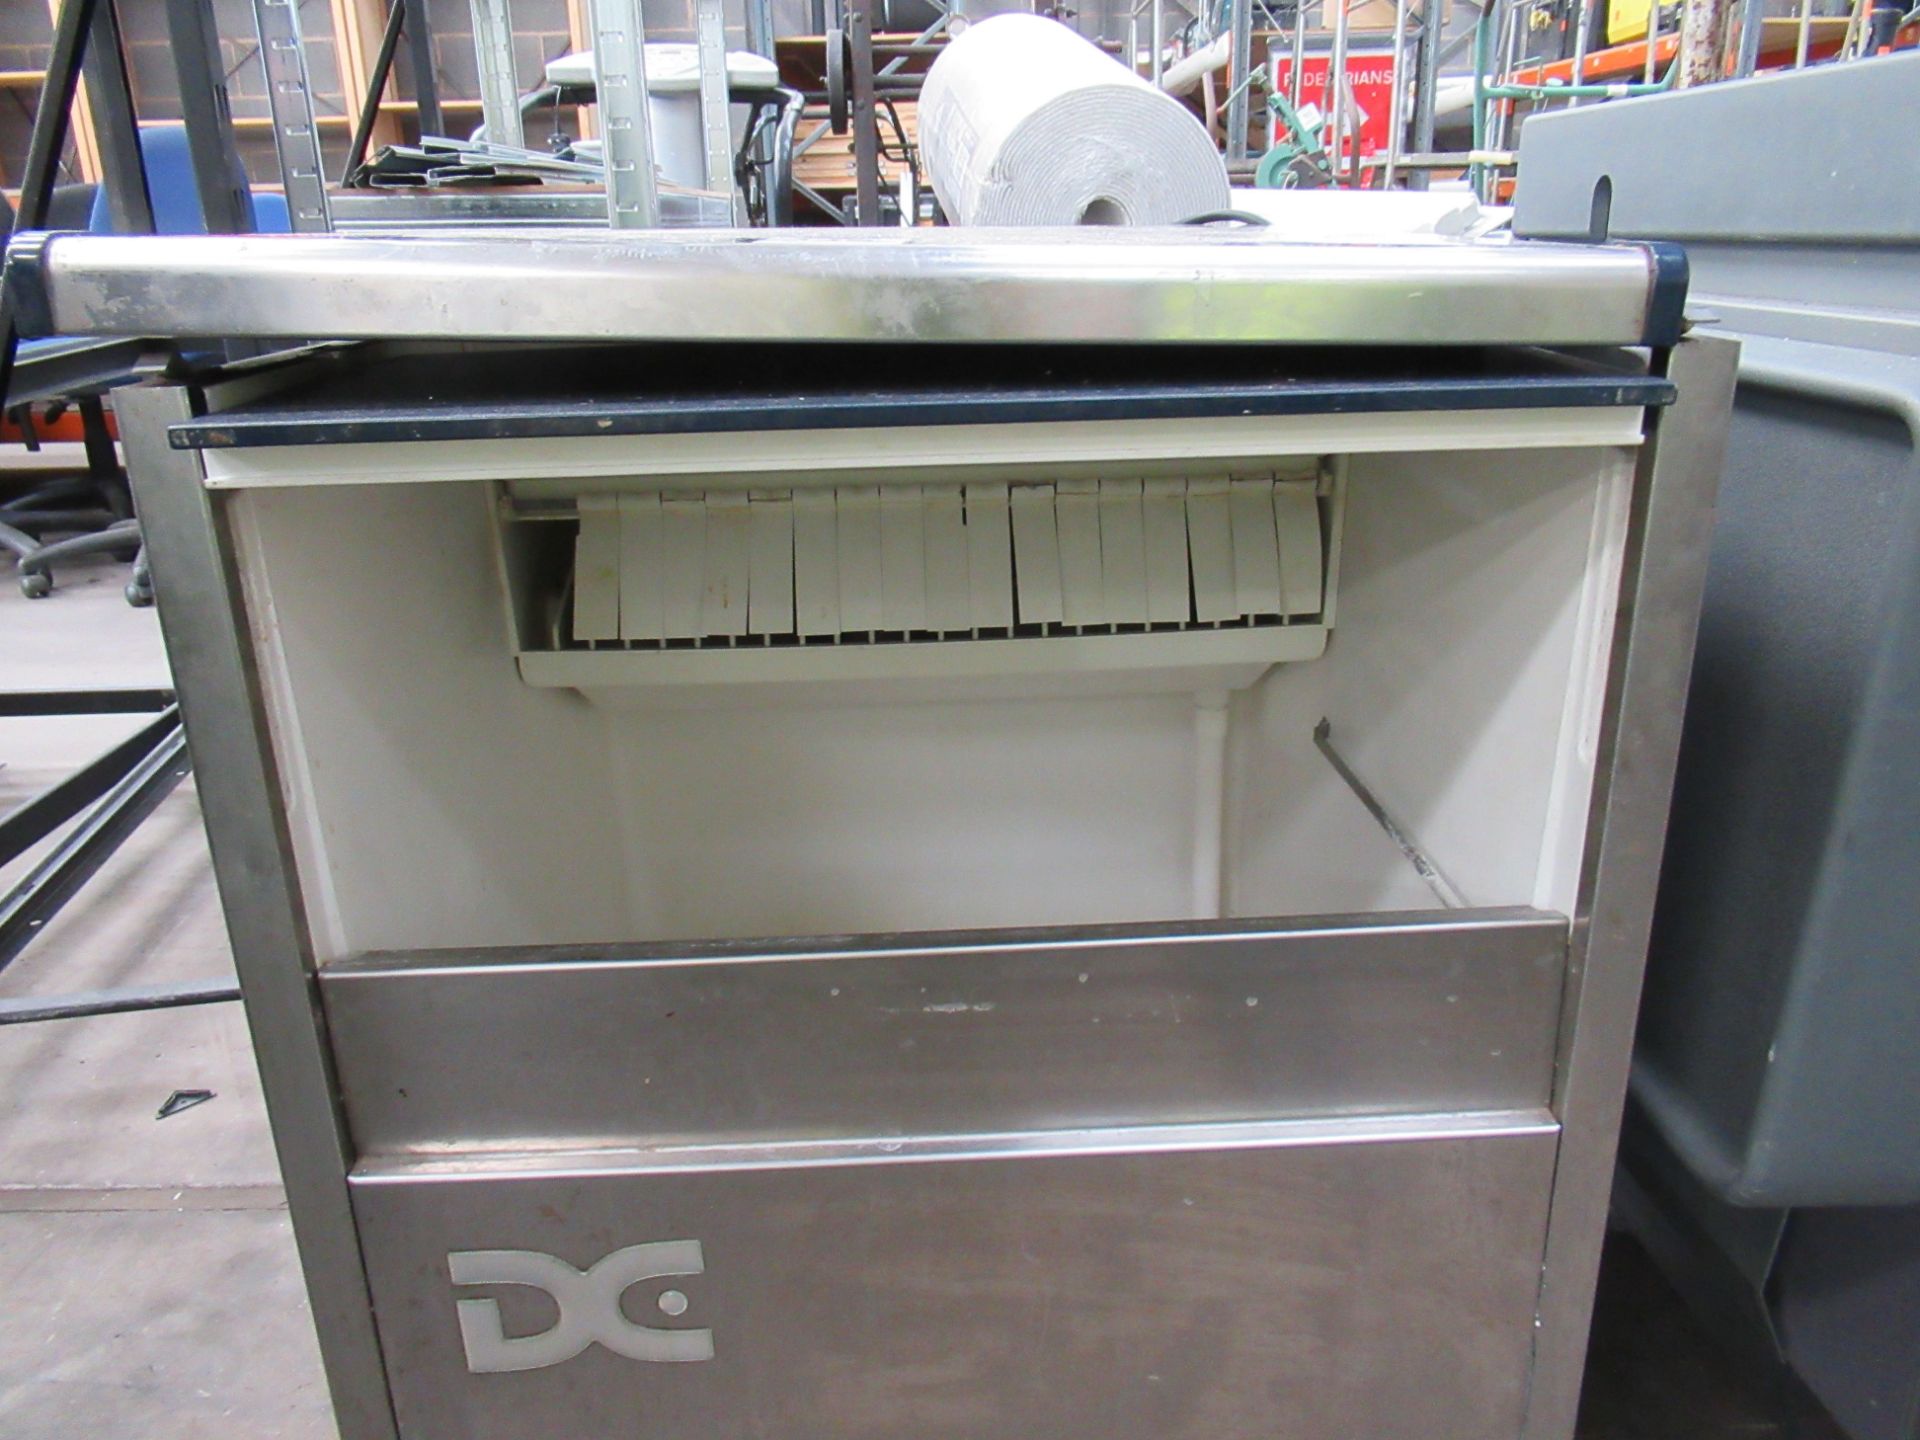 Direct Catering Products DCA525A Ice Making Unit - 240V - YoM 2011 - Image 2 of 4